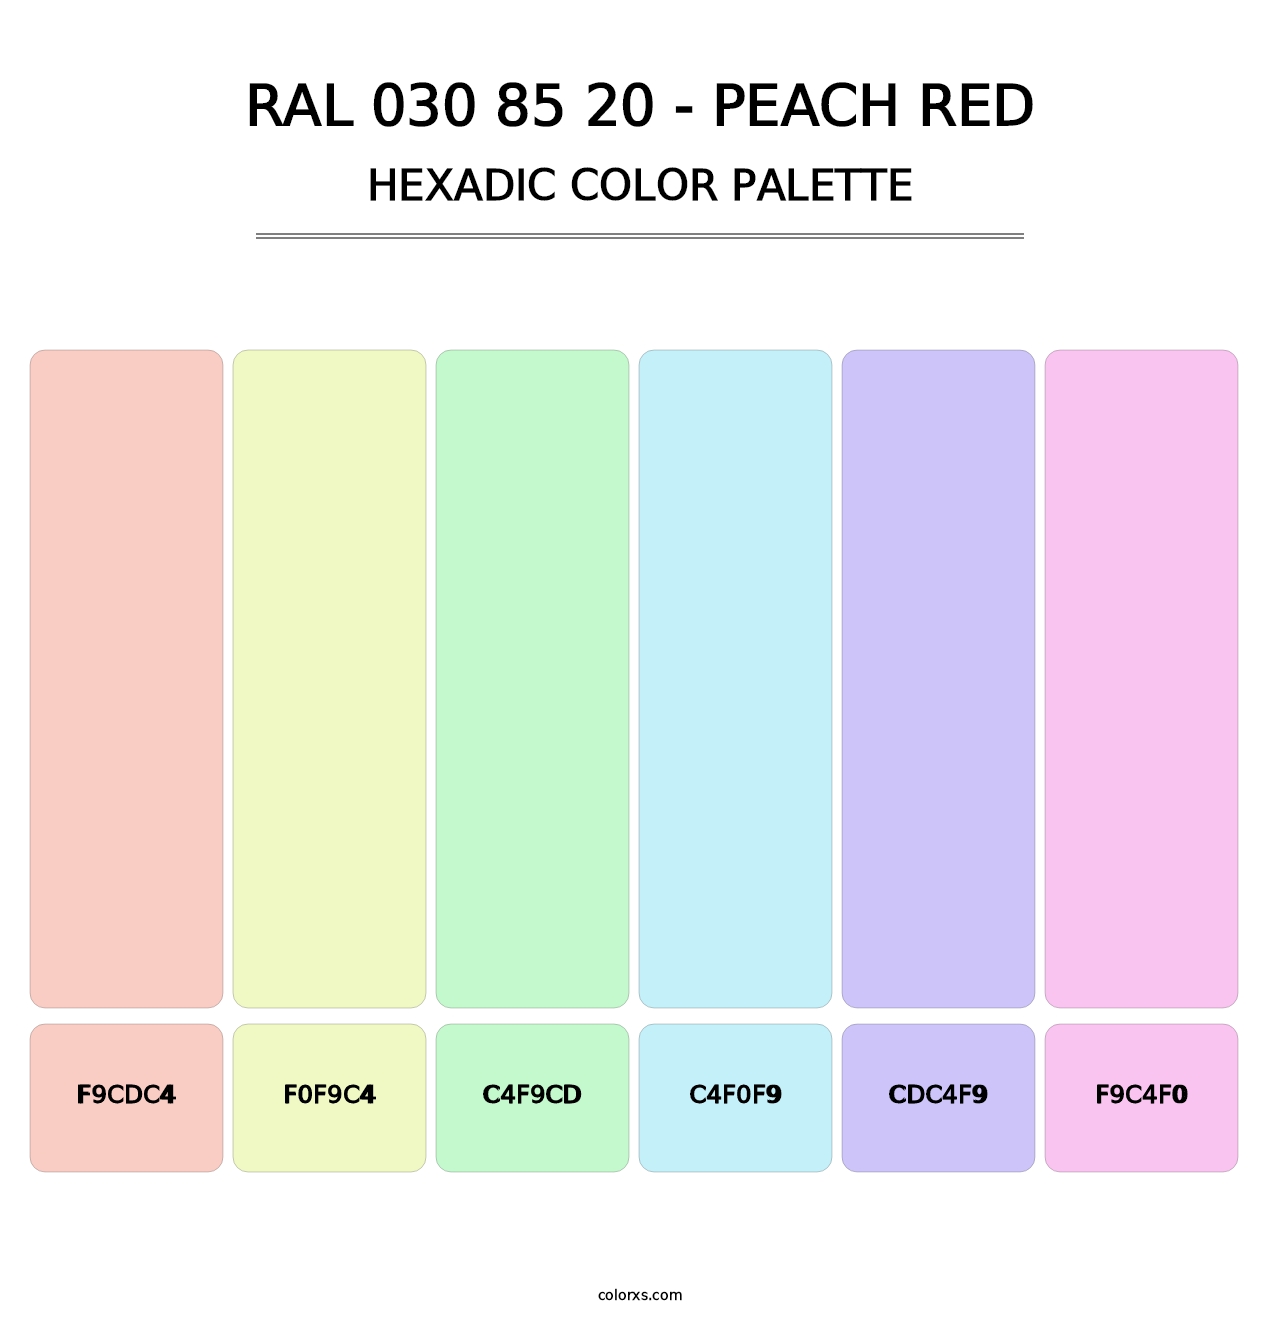 RAL 030 85 20 - Peach Red - Hexadic Color Palette